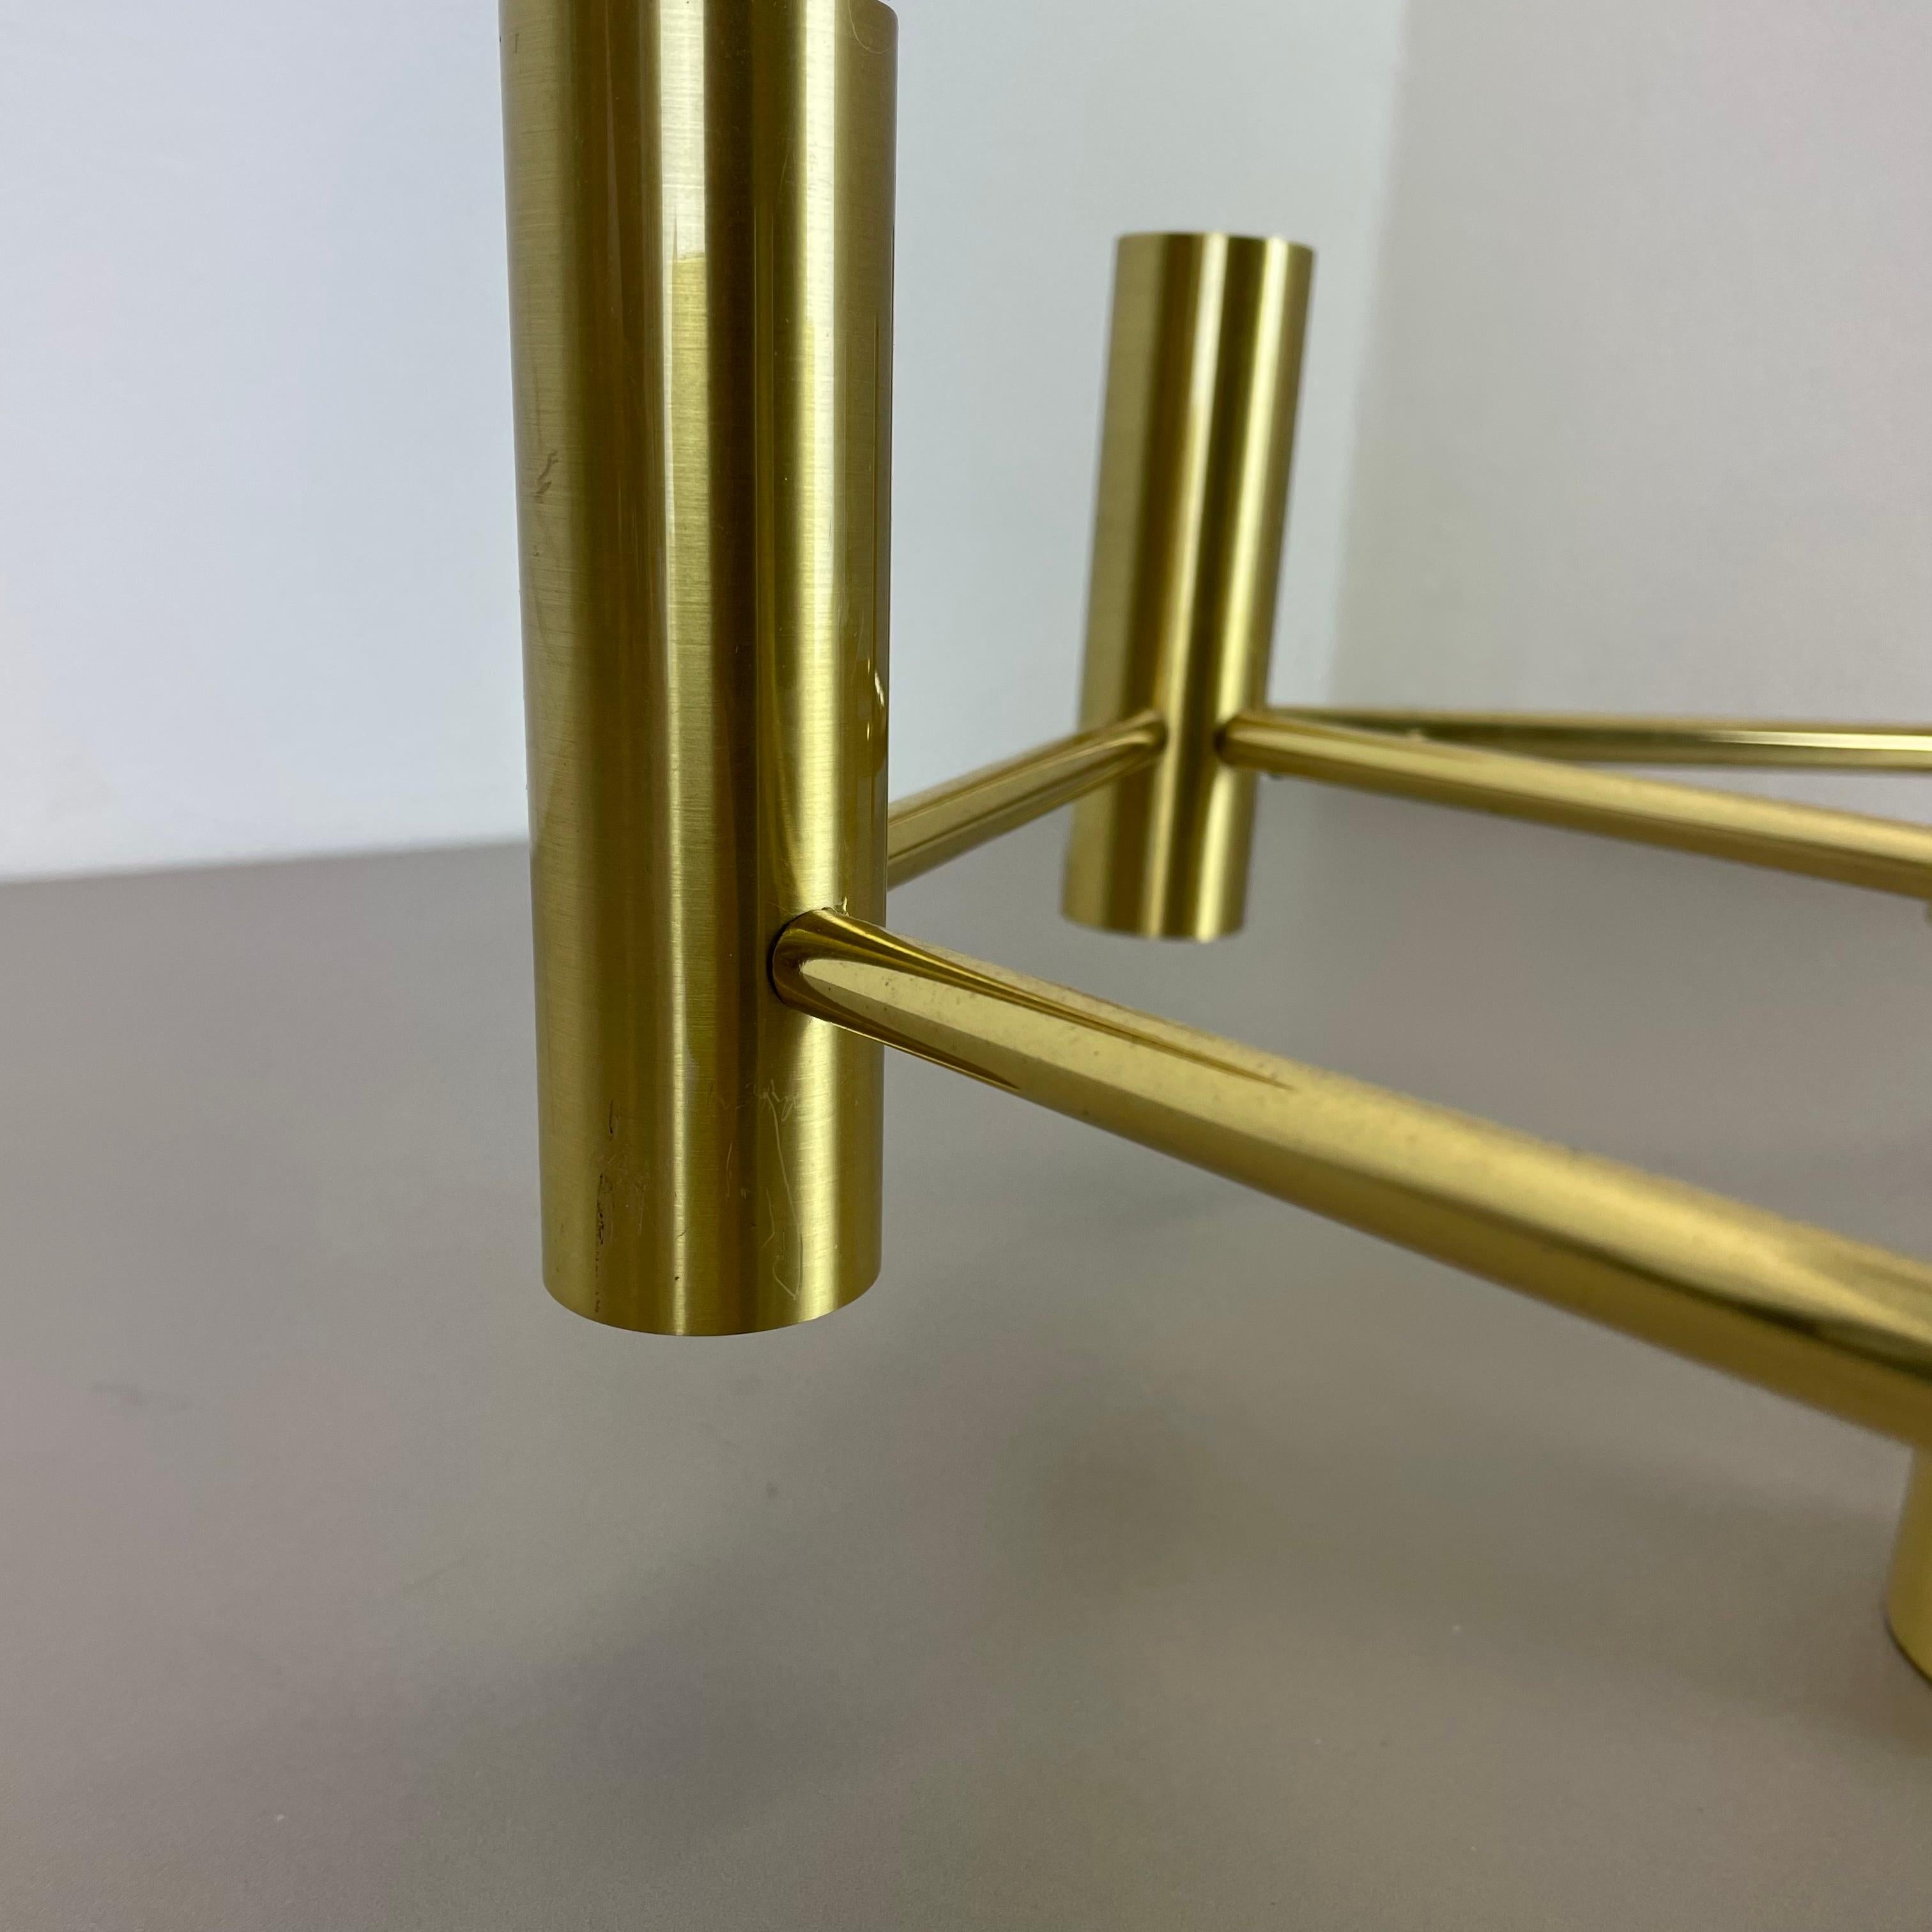 Brass Italian Stilnovo Style Atomic Space Age Ceiling Light Sconces, Italy, 1970 For Sale 9